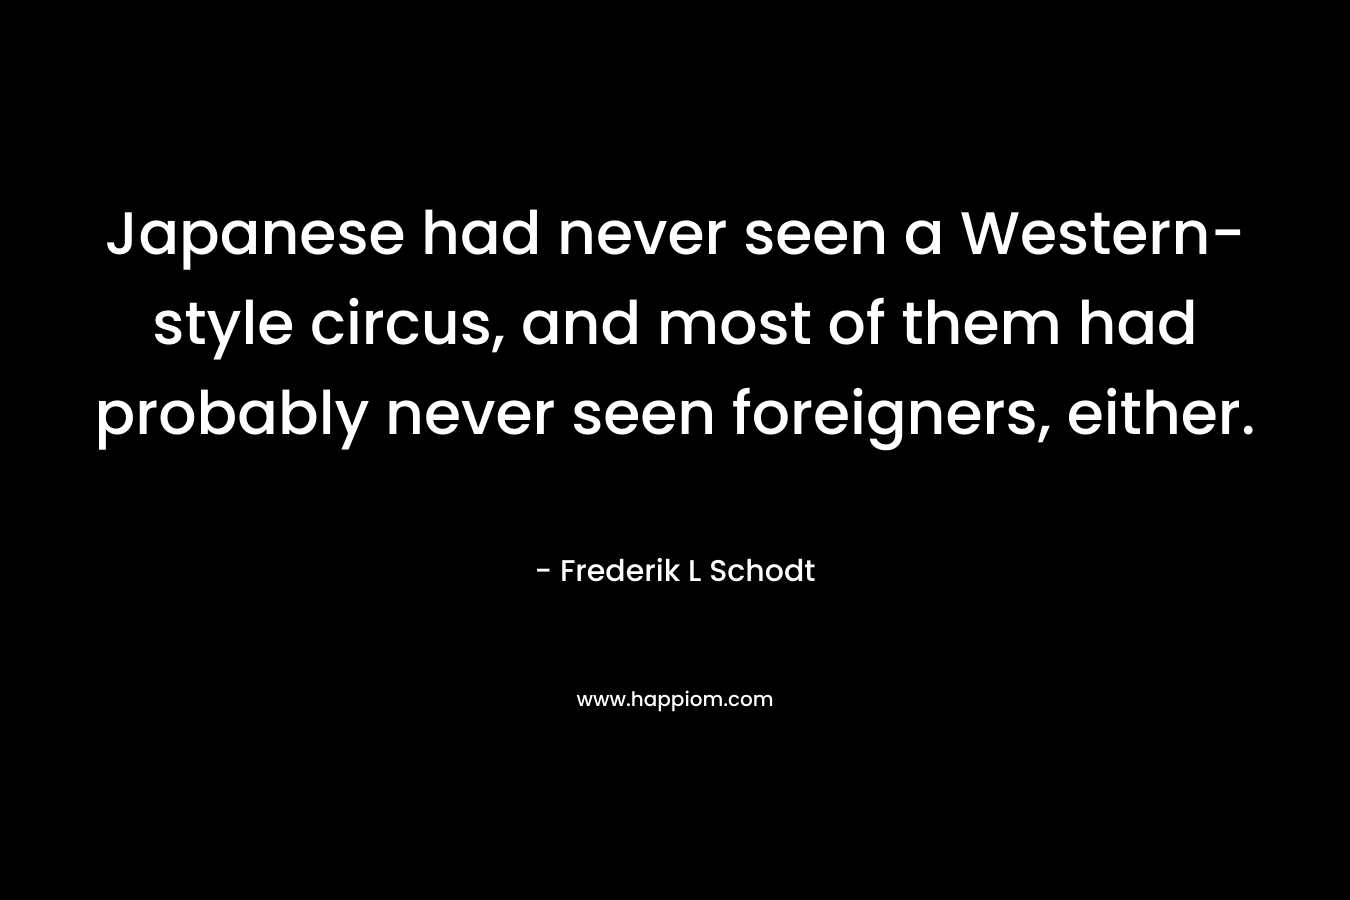 Japanese had never seen a Western-style circus, and most of them had probably never seen foreigners, either.